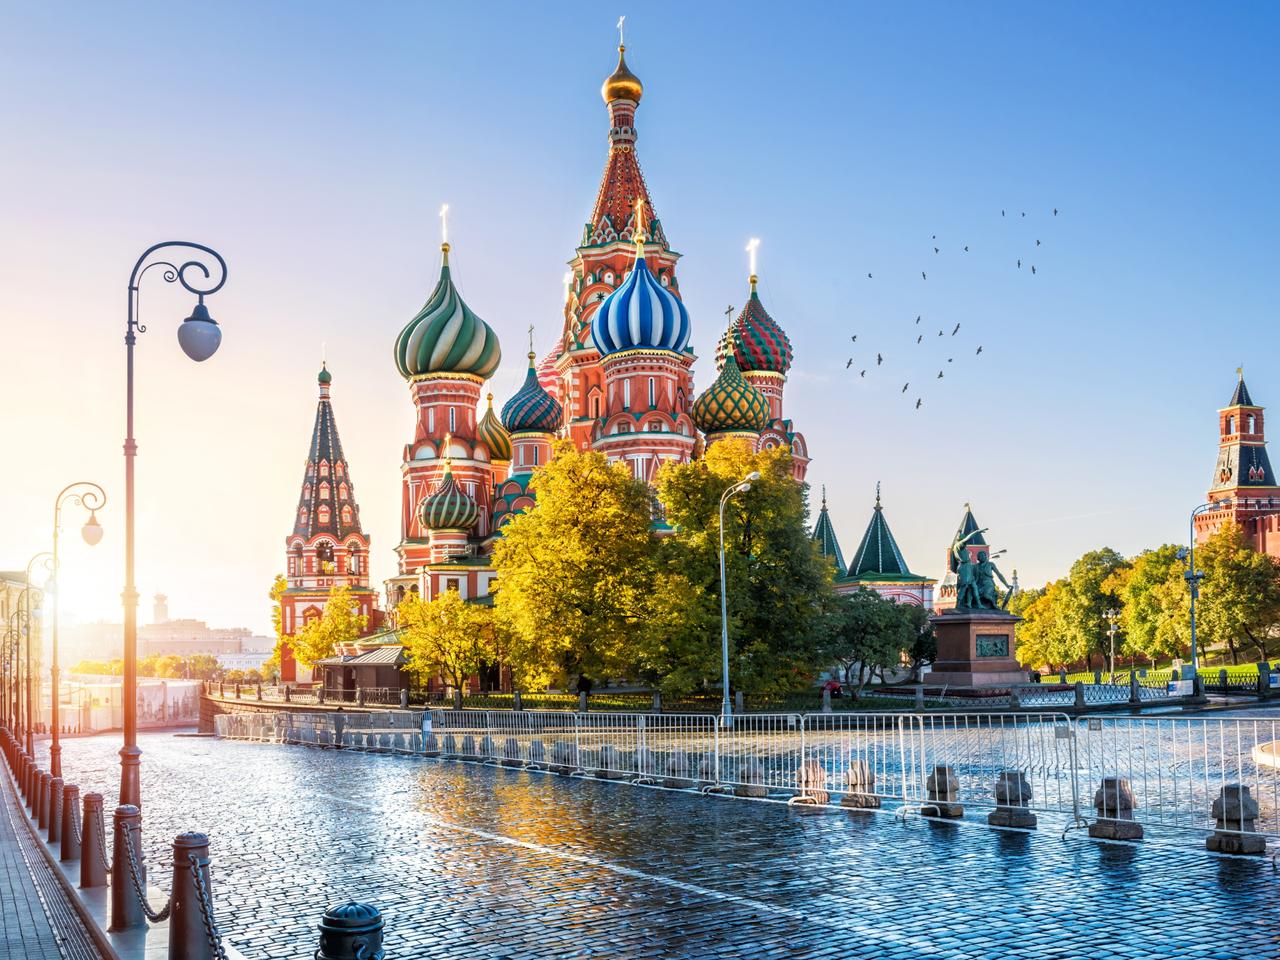 Can You Get Better Than 80% On This Geography Quiz? St. Basil's Cathedral, Moscow, Russia